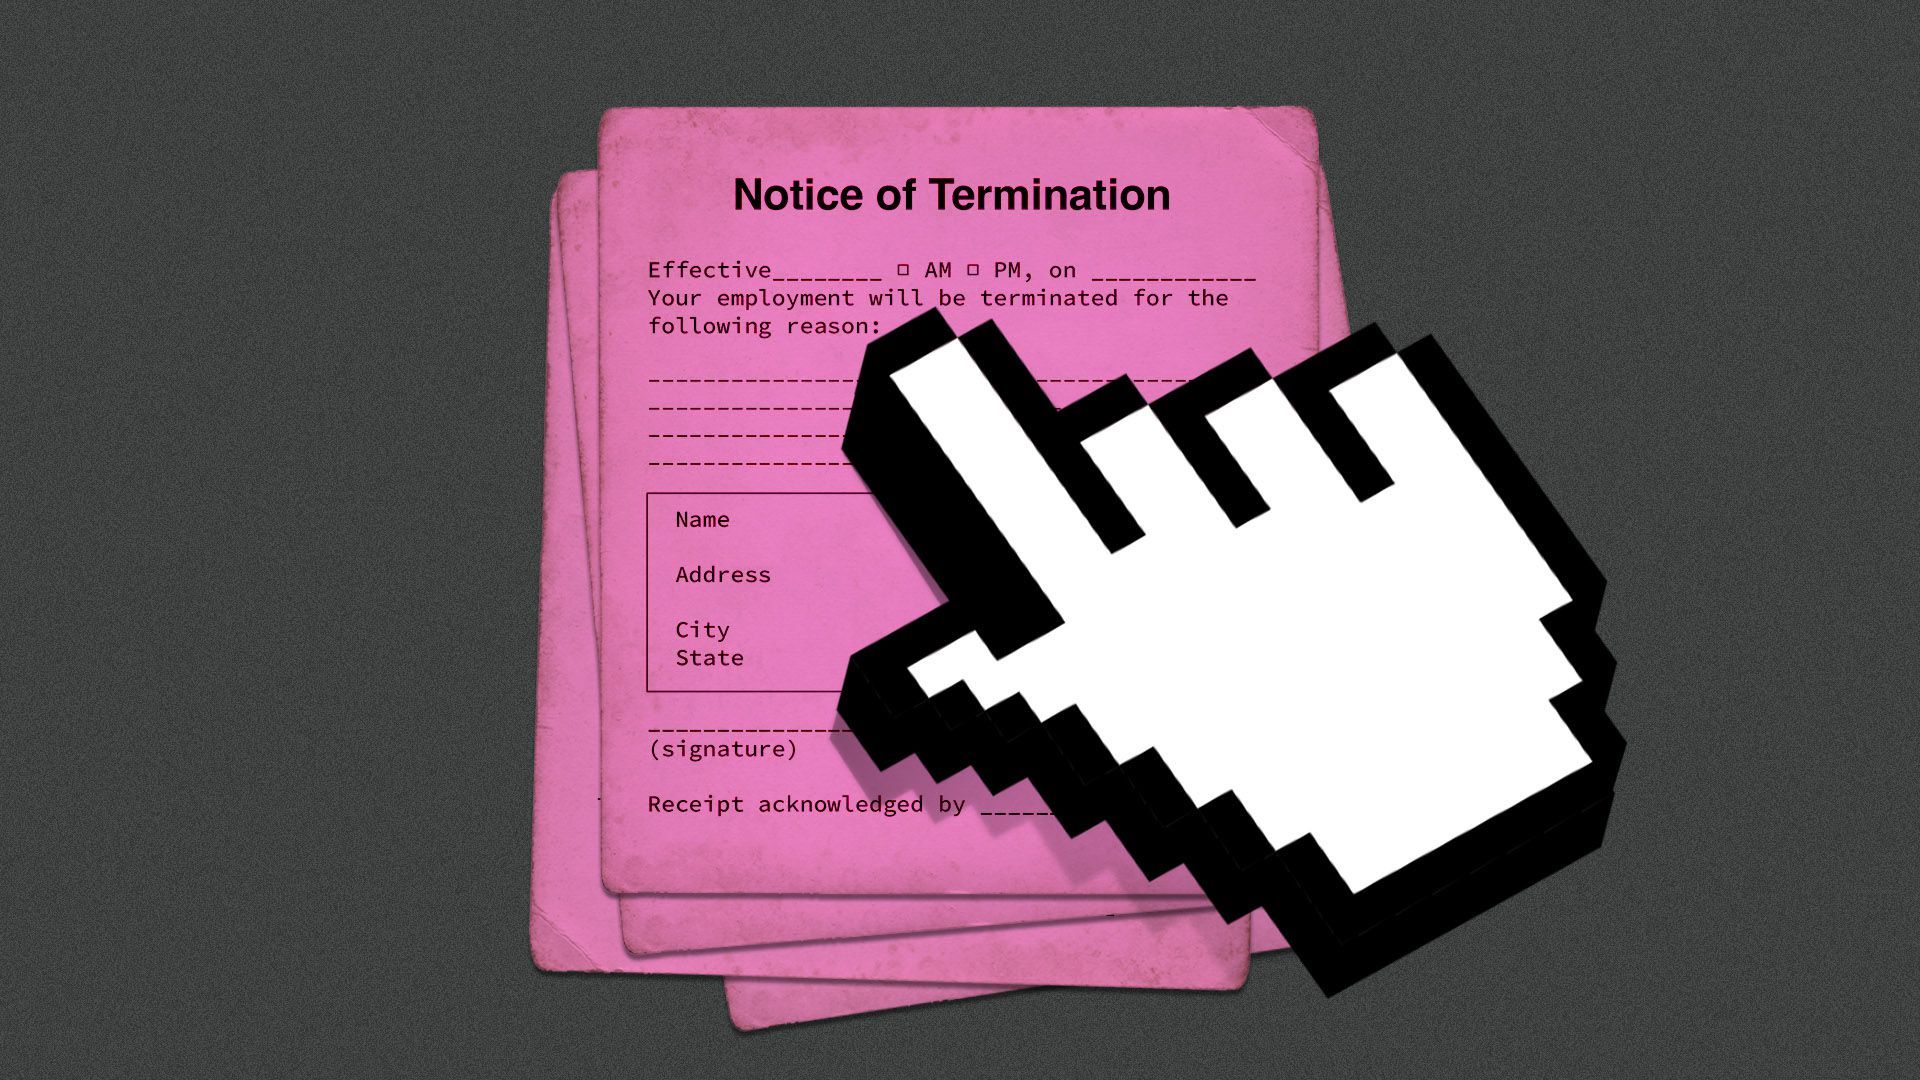 Illustration of a stack of pink slips with a pointing finger cursor holding them up